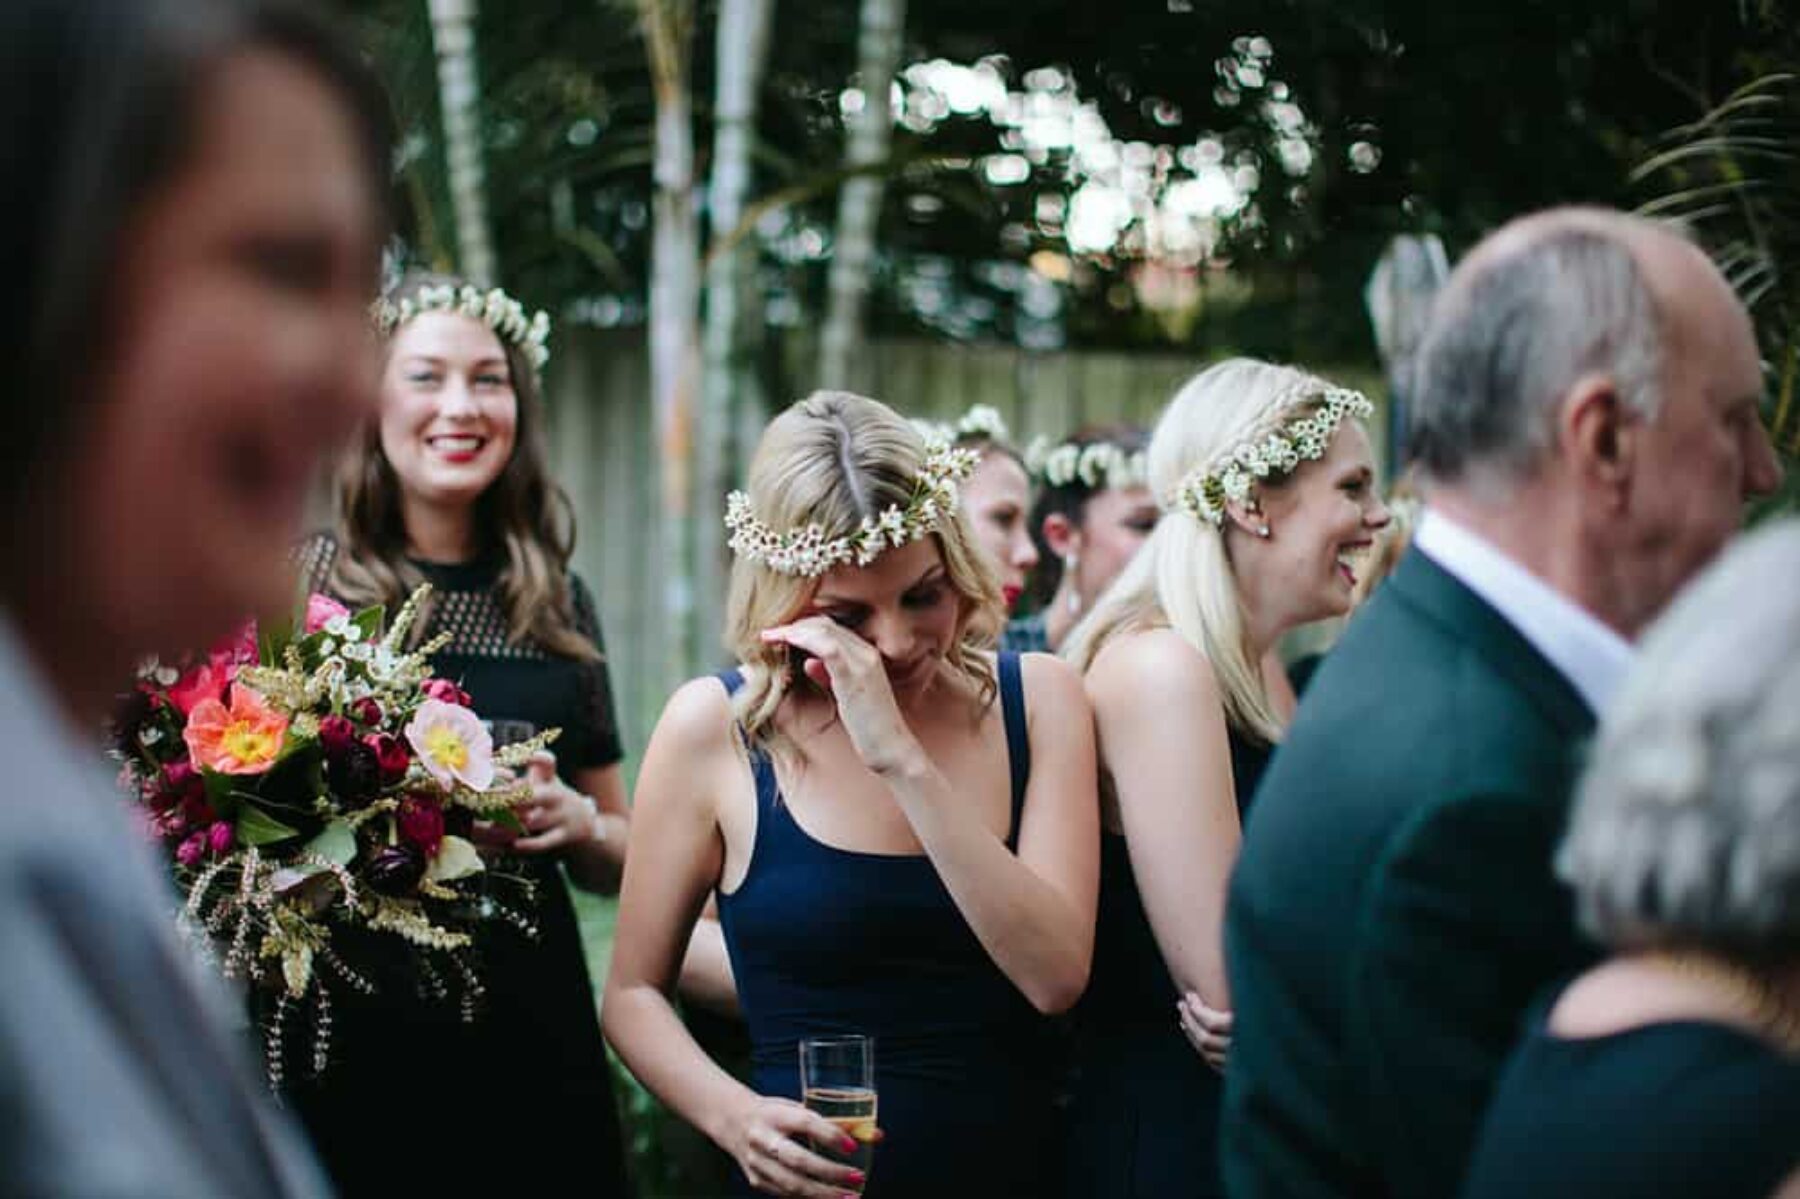 bridesmaids in black dresses and white flower crowns